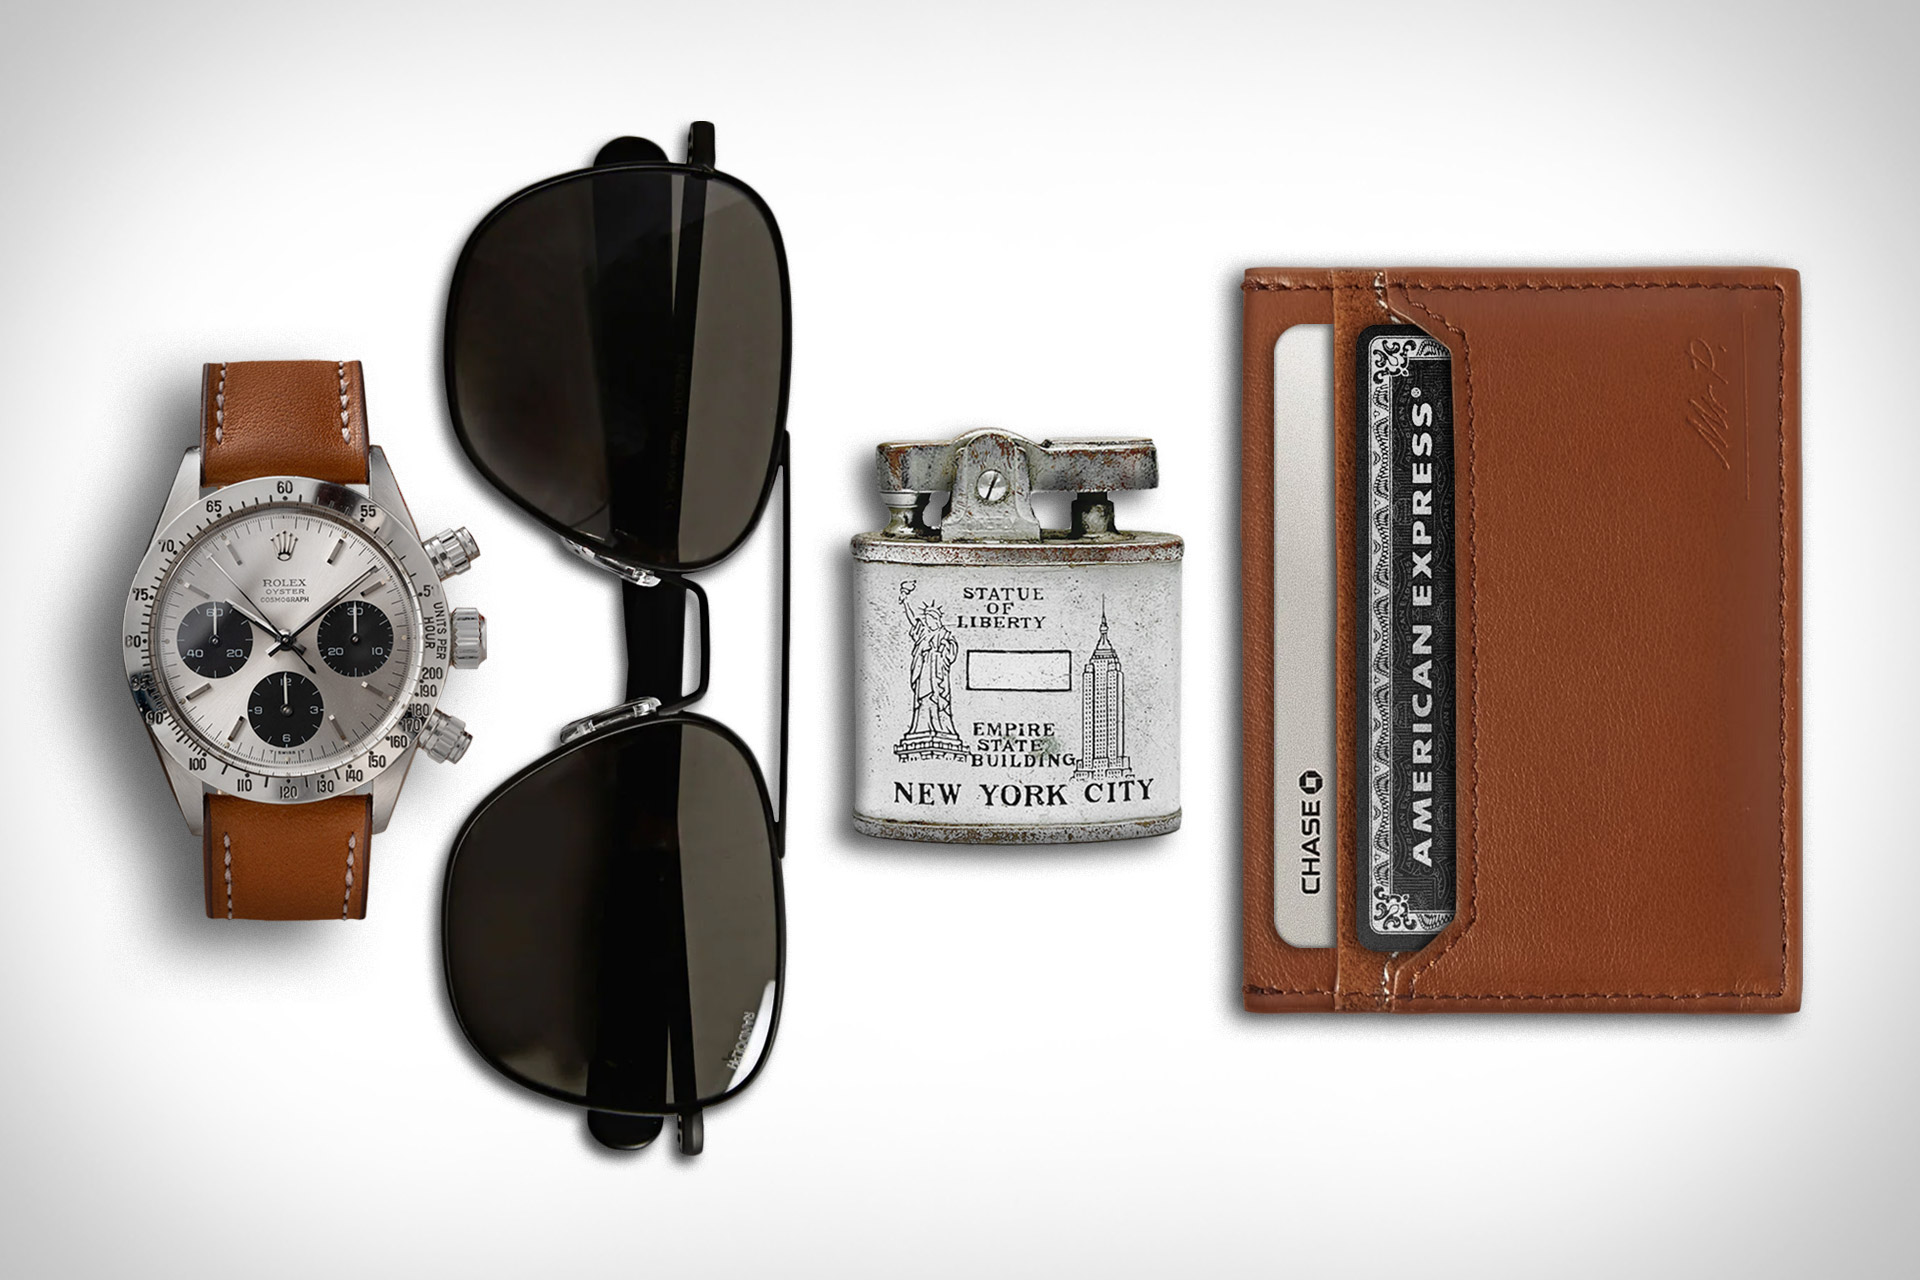 Everyday Carry: Empire State | Uncrate, #Everyday #Carry #Empire #State #Uncrate